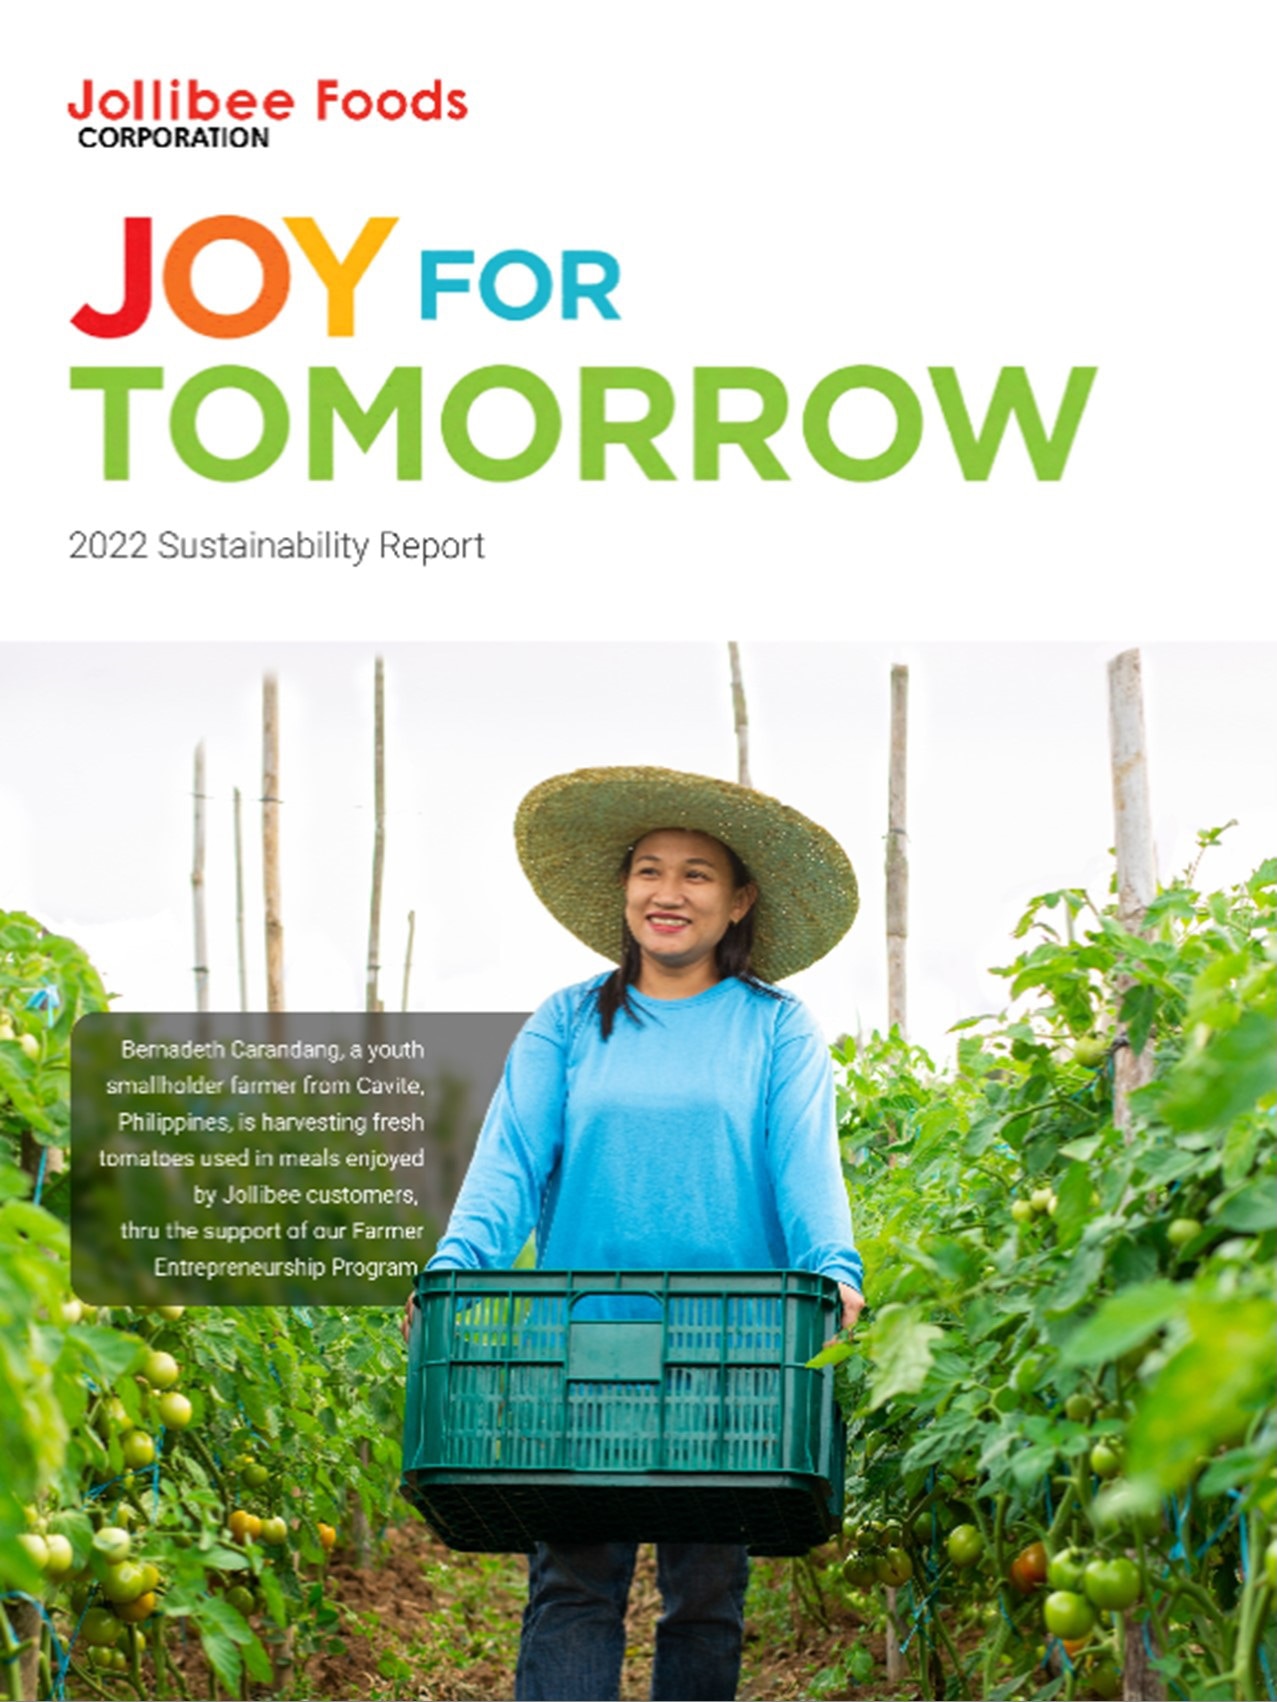 Jollibee Group also released its first-ever global sustainability report which details the progress it has made toward the pursuit of its sustainability pillars of Food, People, and Planet. Photo source: Jollibee Group